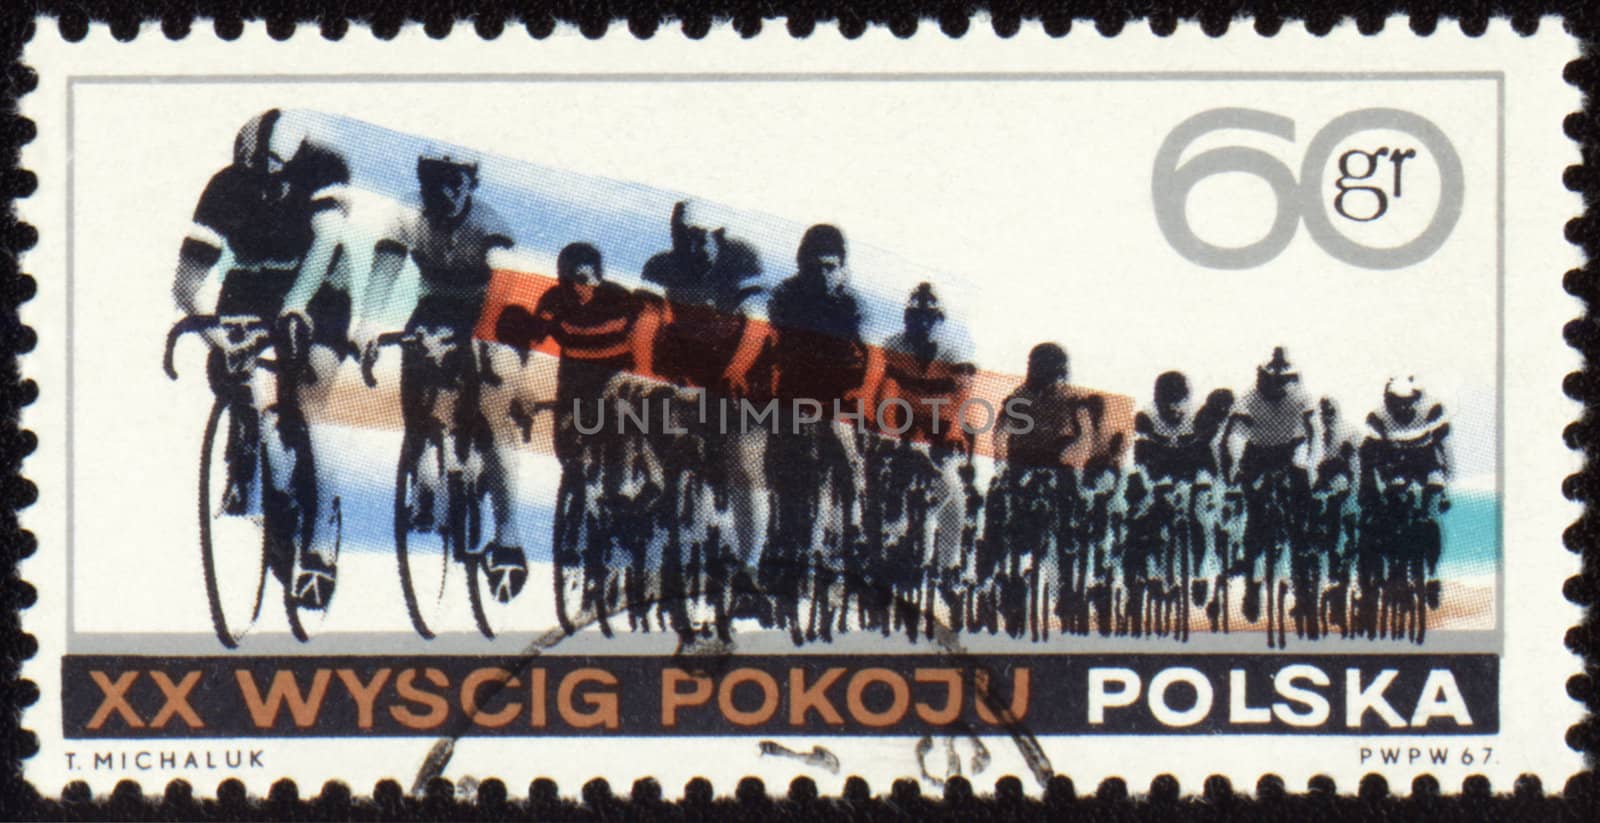 POLAND - CIRCA 1967: A stamp printed in Poland shows group of cyclists, devoted to XX International Peace Cycling Race, circa 1967